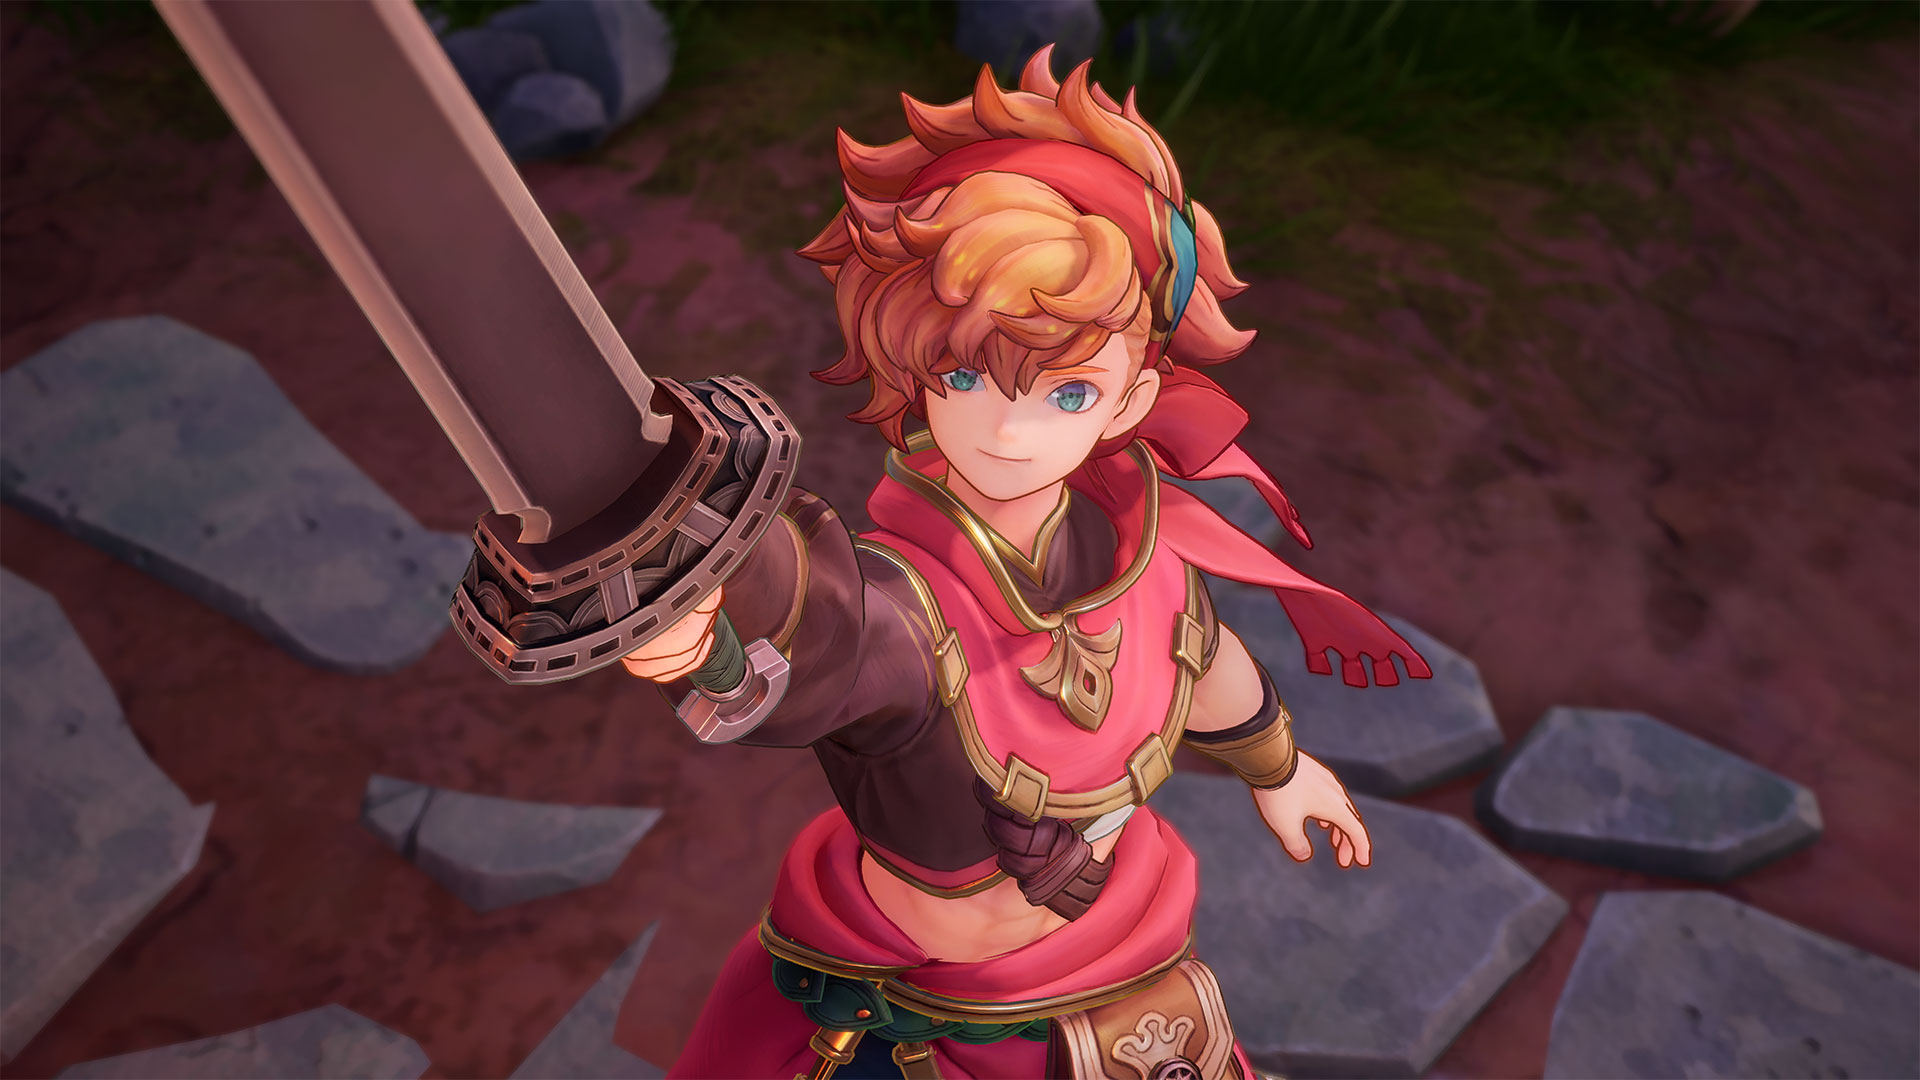 Square Enix releases a new trailer for the action-adventure game Visions of Mana